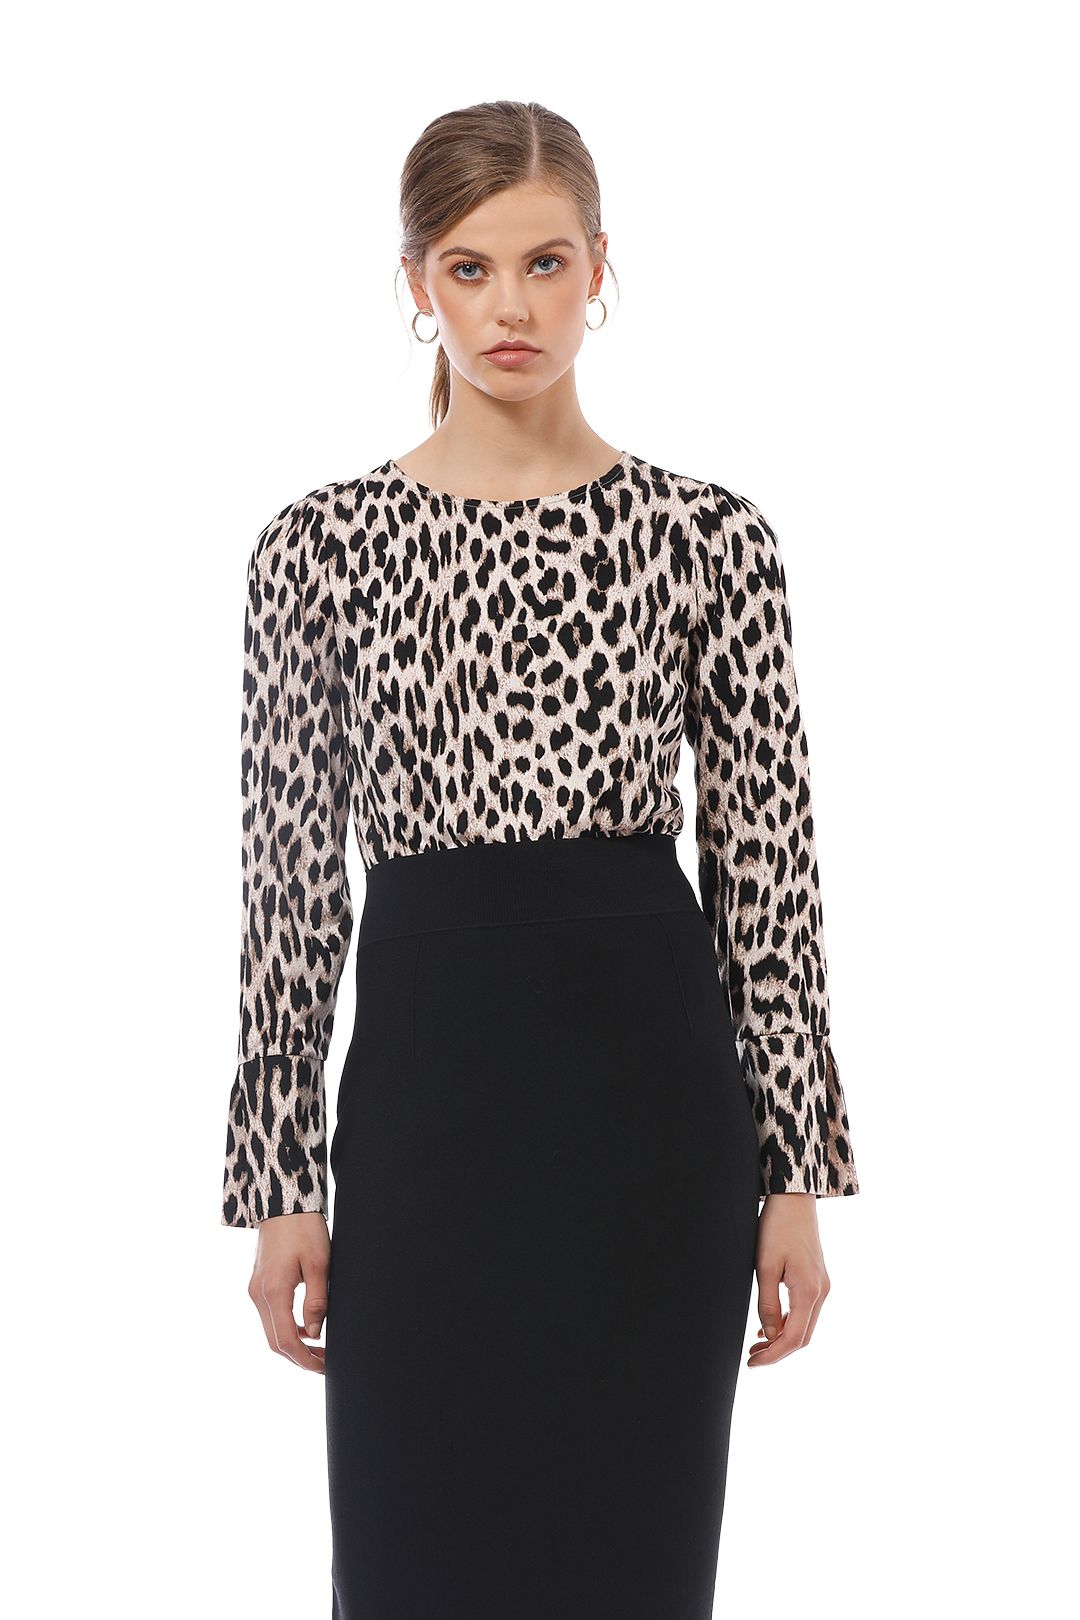 Witchery - Sleeve Detail Top - Leopard Print - Close Up